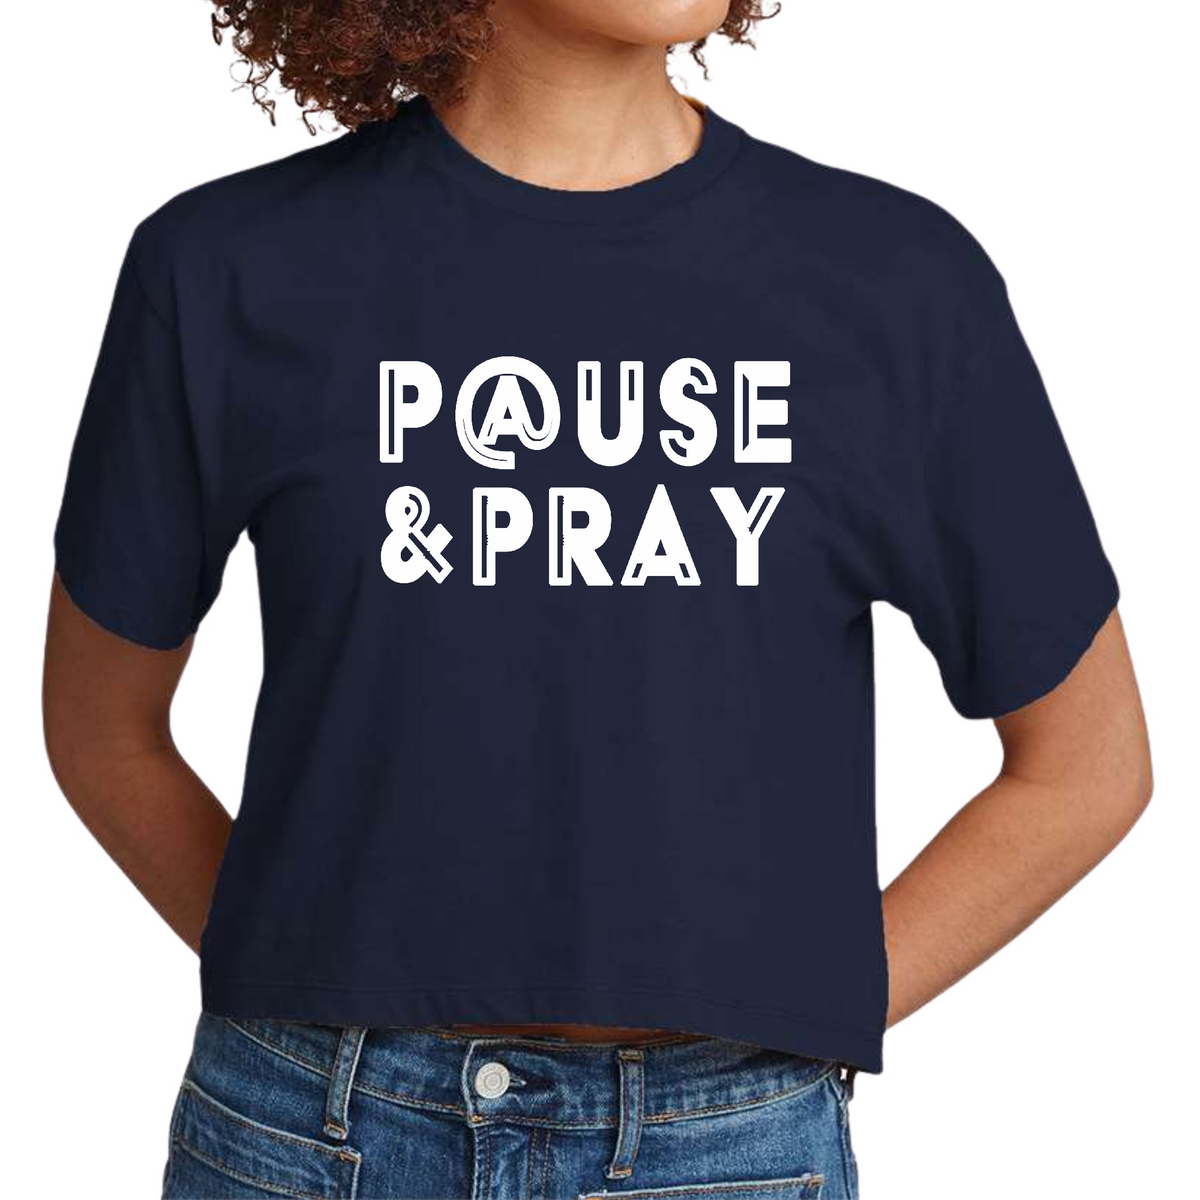 Womens Short Sleeve Cropped T-Shirt, Pause And Pray, Christian by inQue.Style